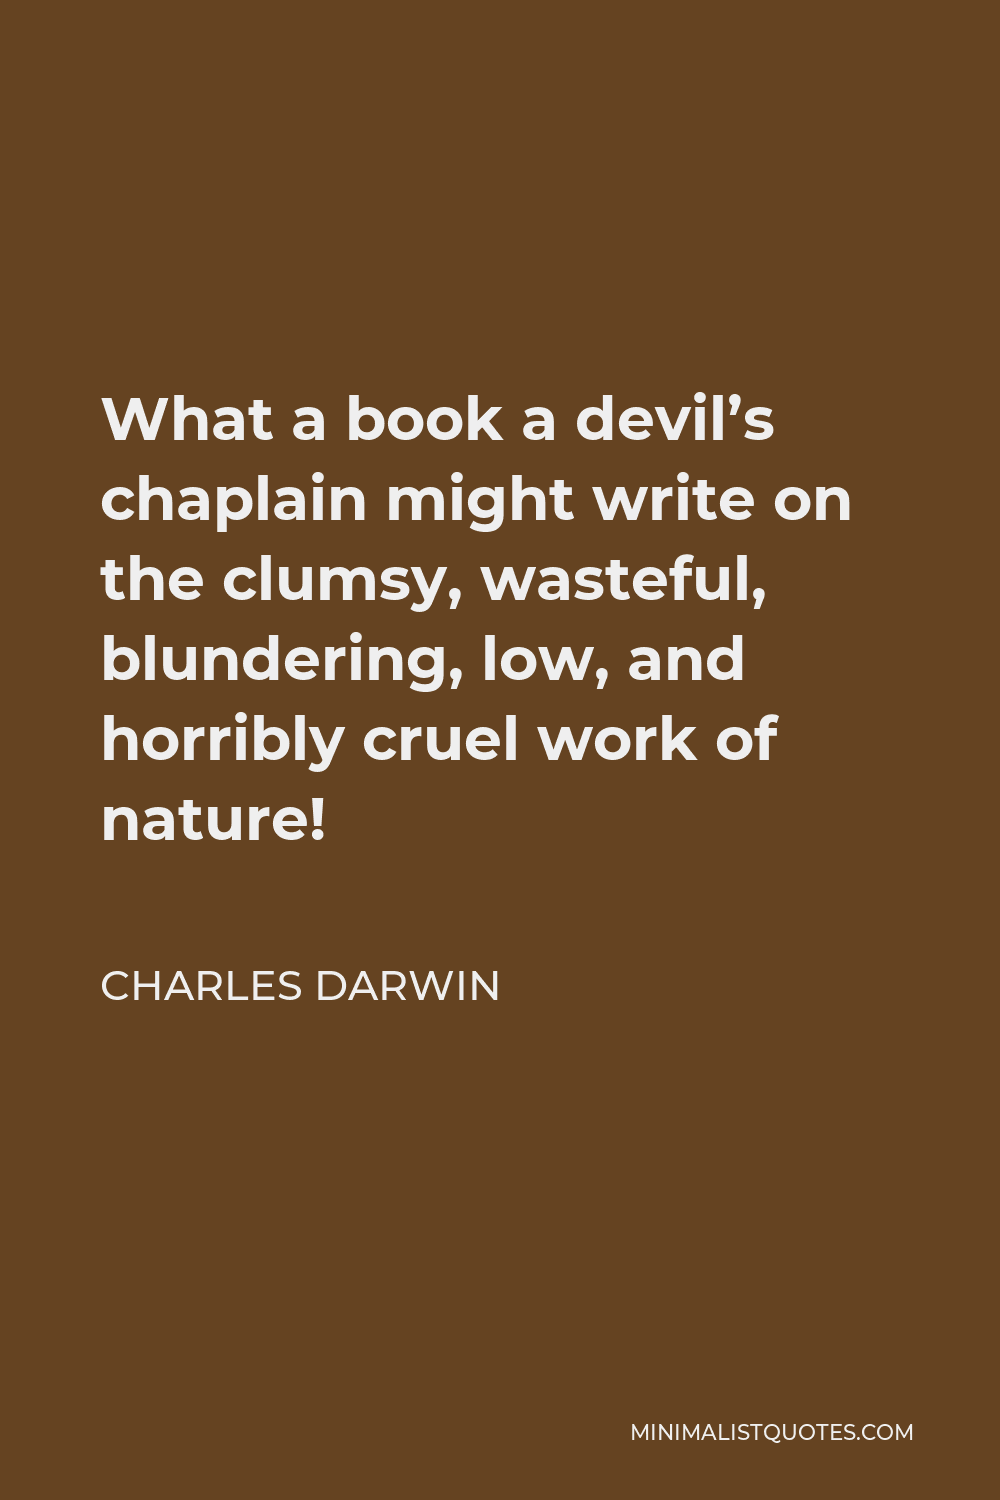 Charles Darwin Quote - What a book a devil’s chaplain might write on the clumsy, wasteful, blundering, low, and horribly cruel work of nature!